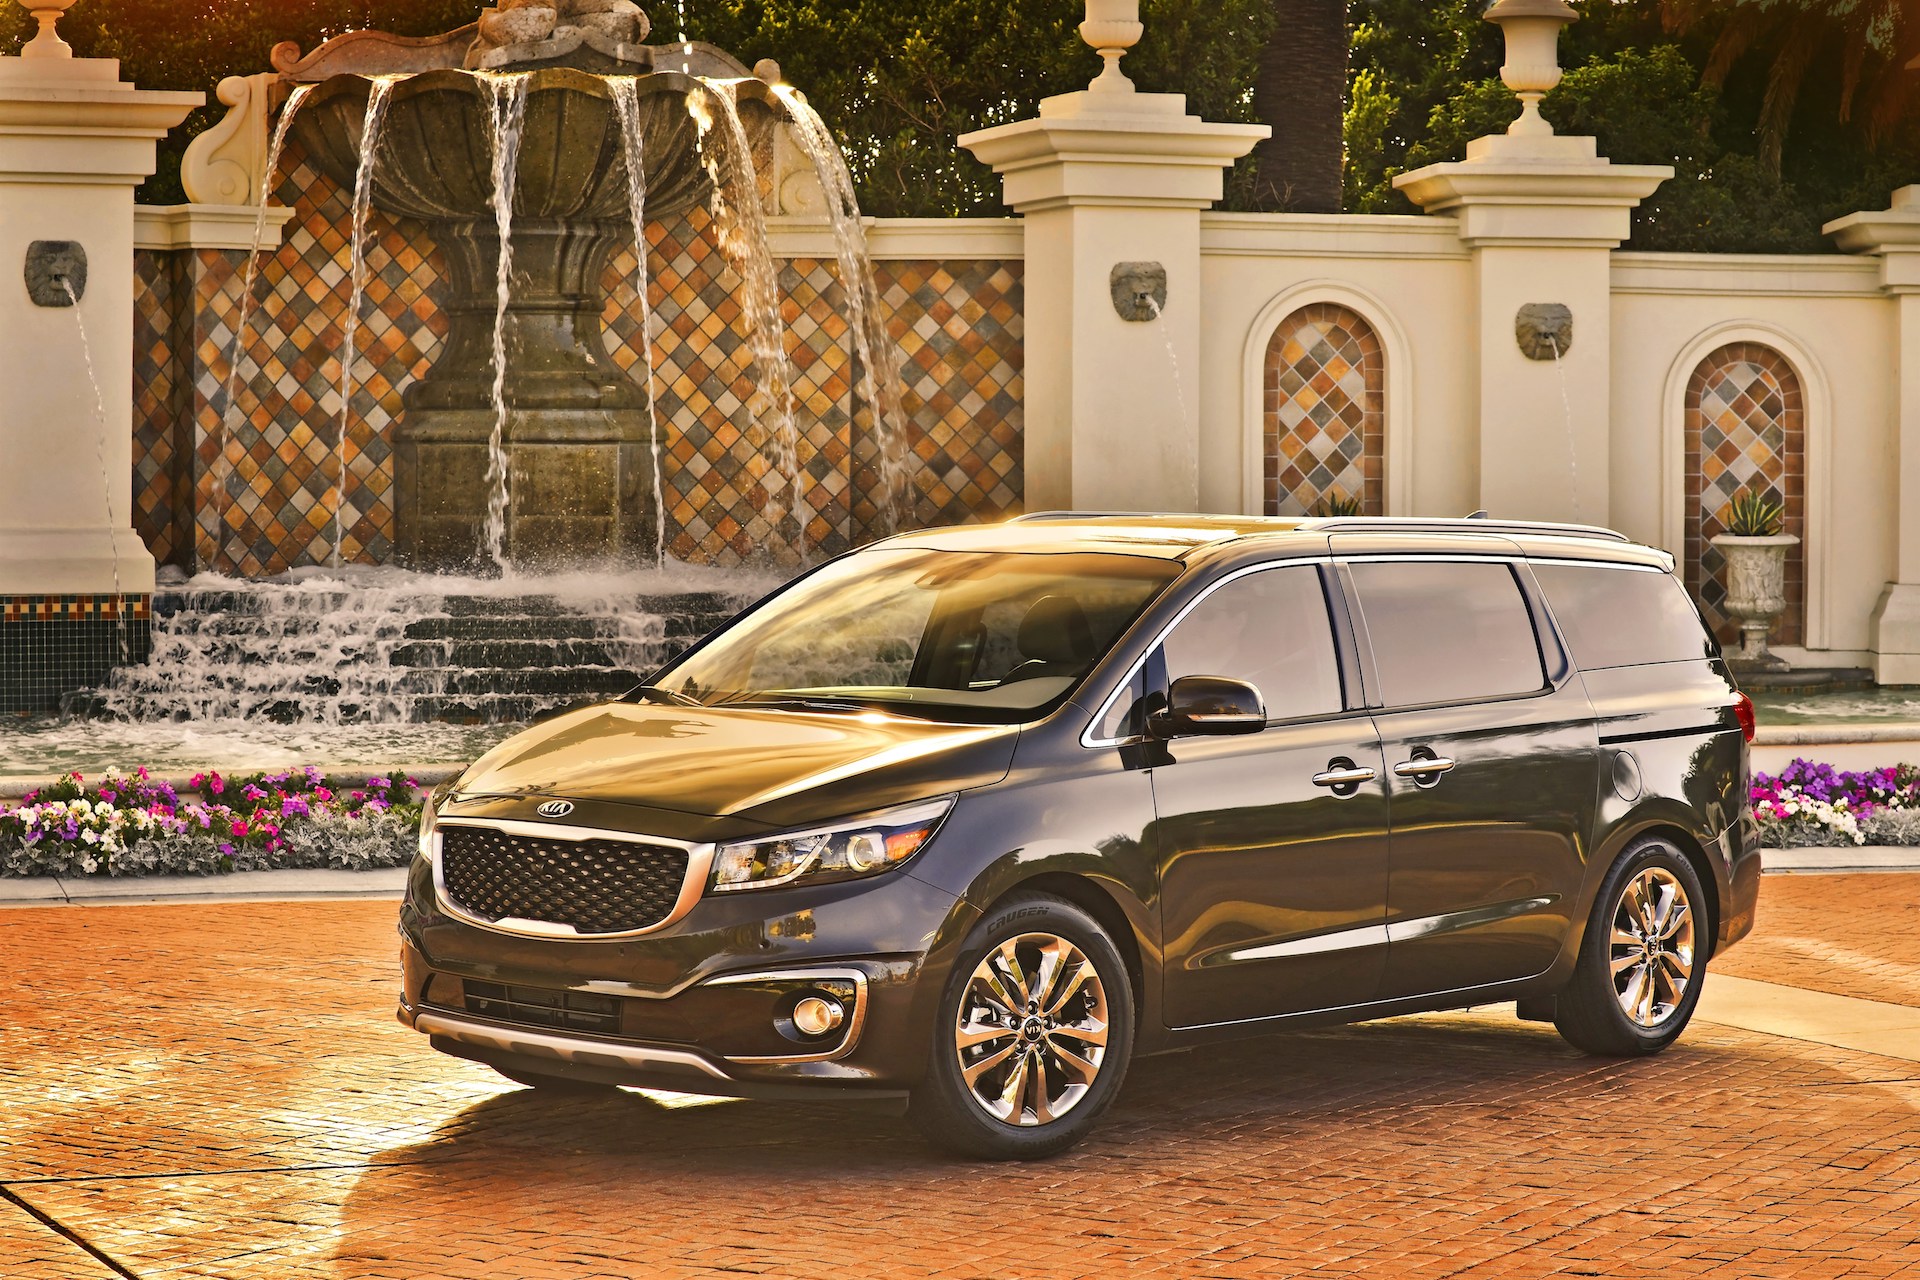 2018 Kia Sedona Review, Ratings, Specs, Prices, and Photos - The Car ...